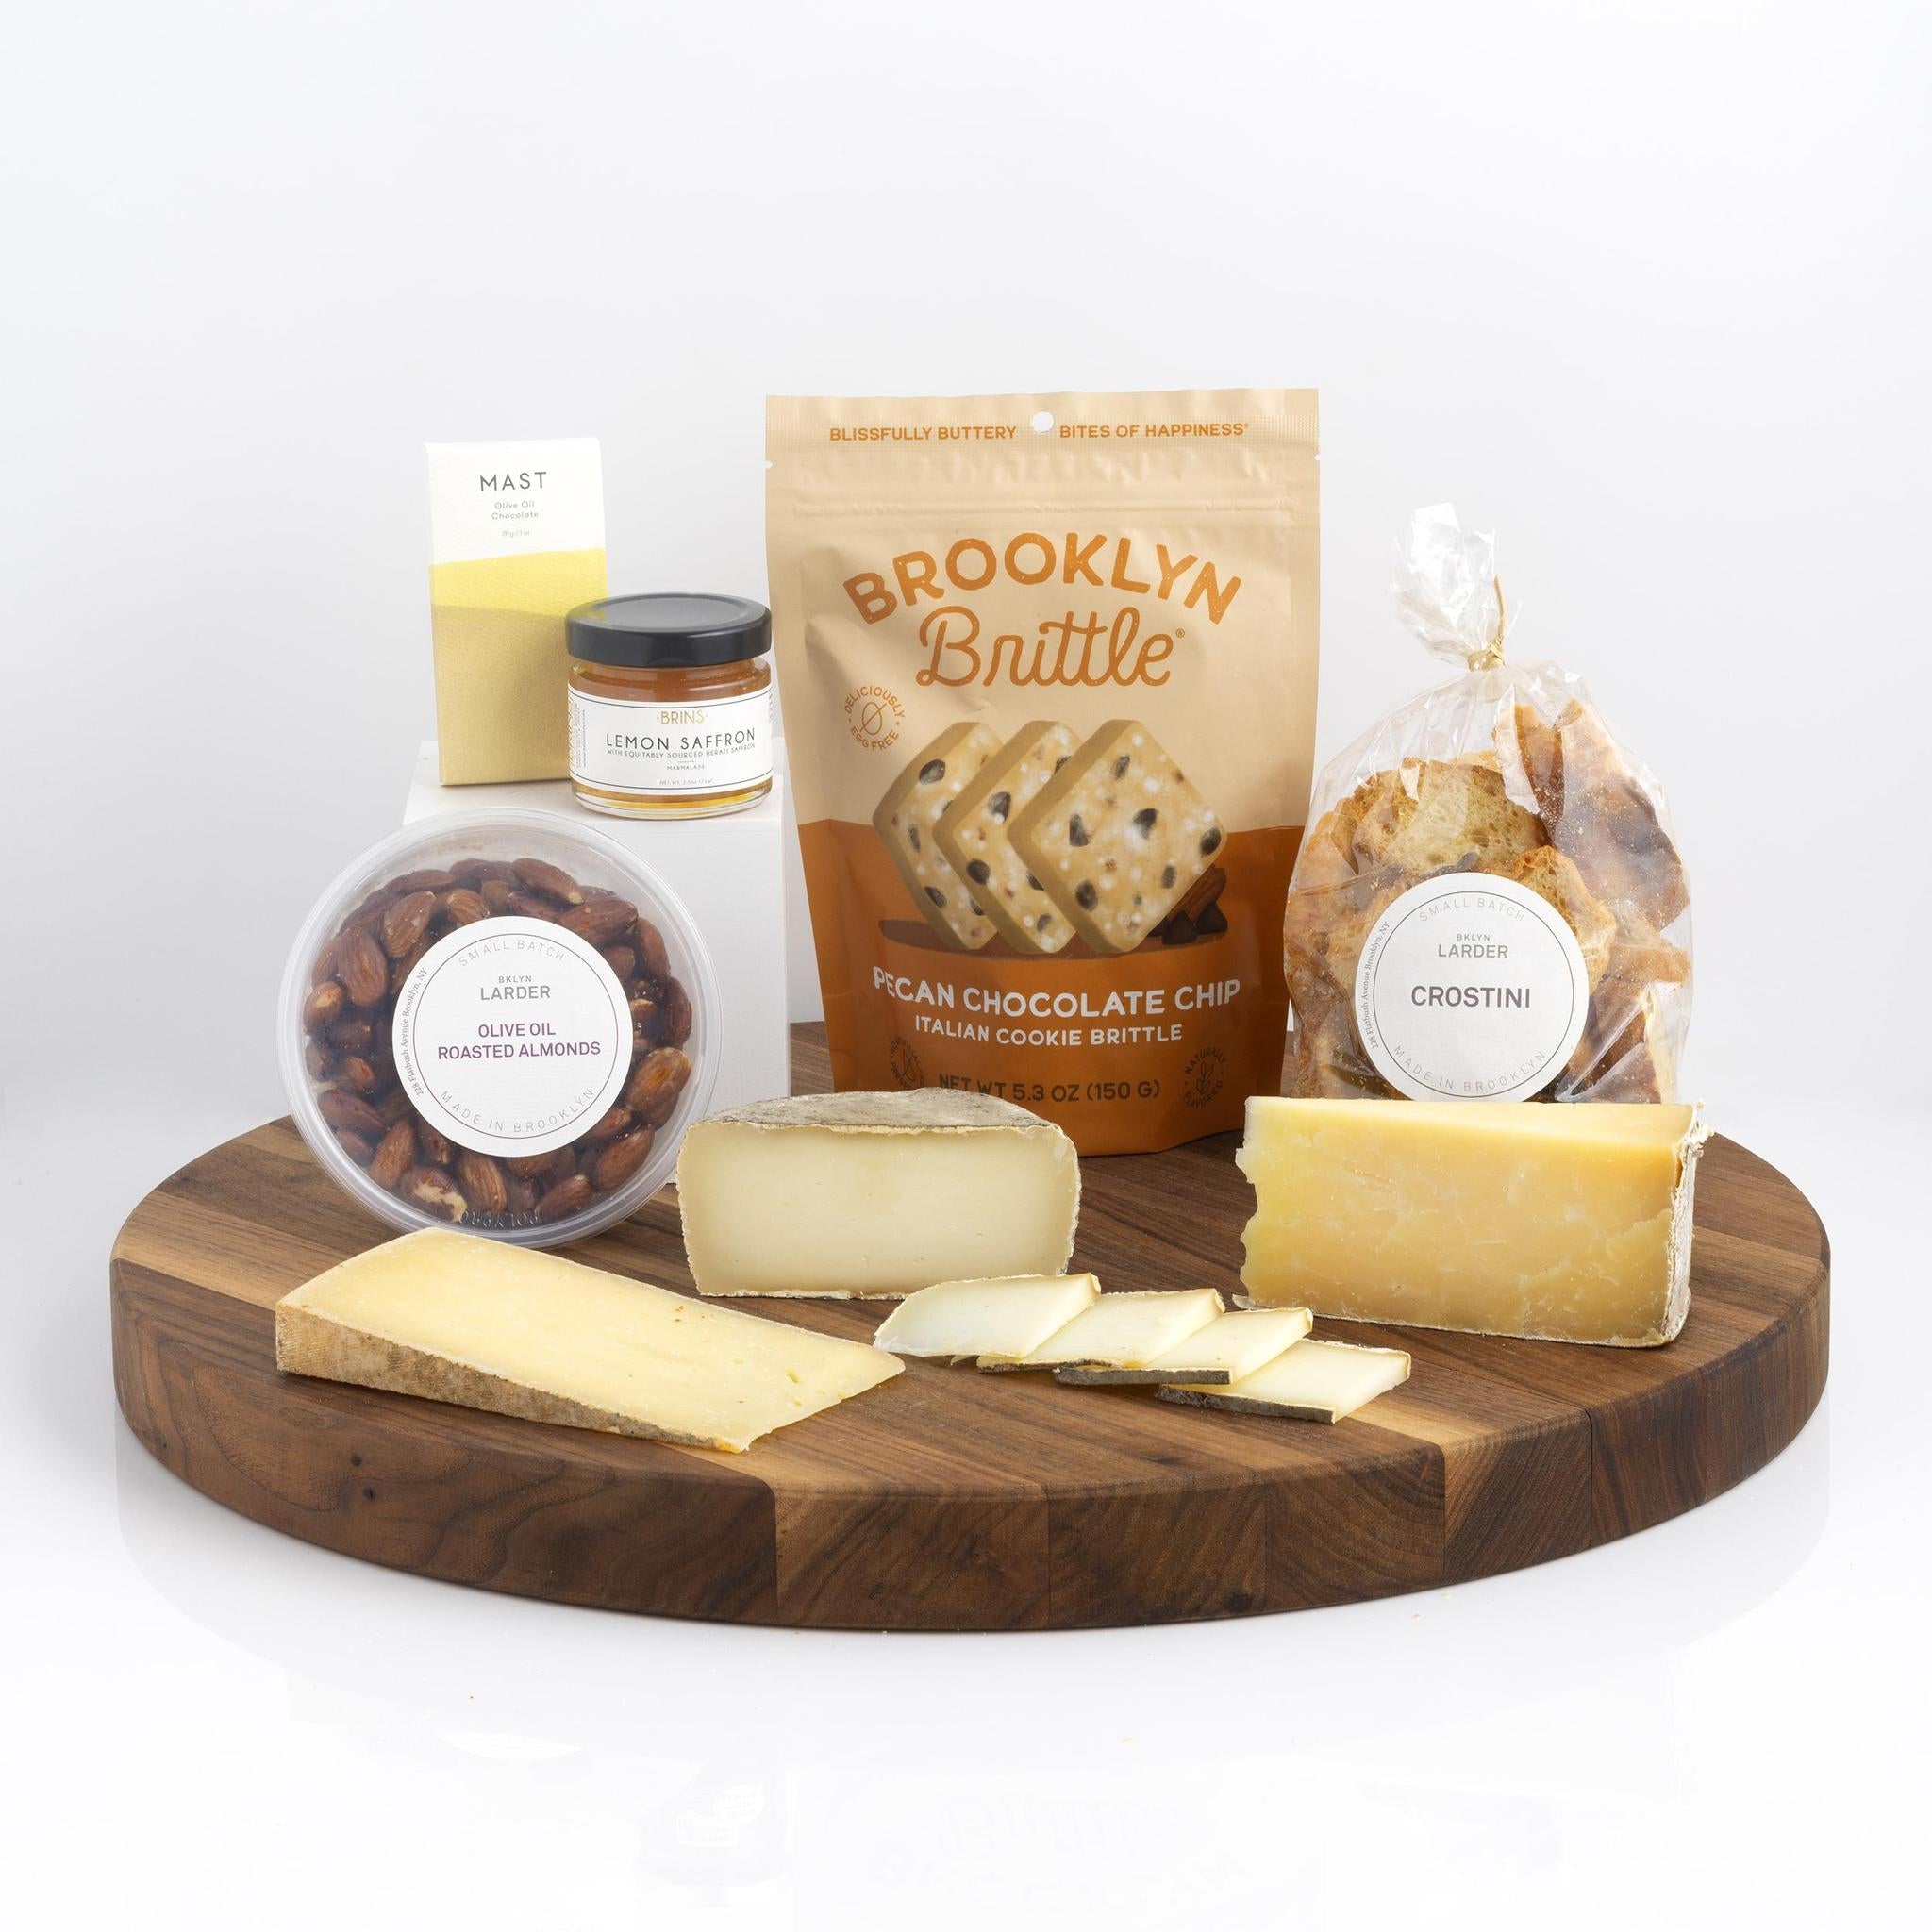 New Home Gift Basket - BKLYN Larder Cheese & Provisions